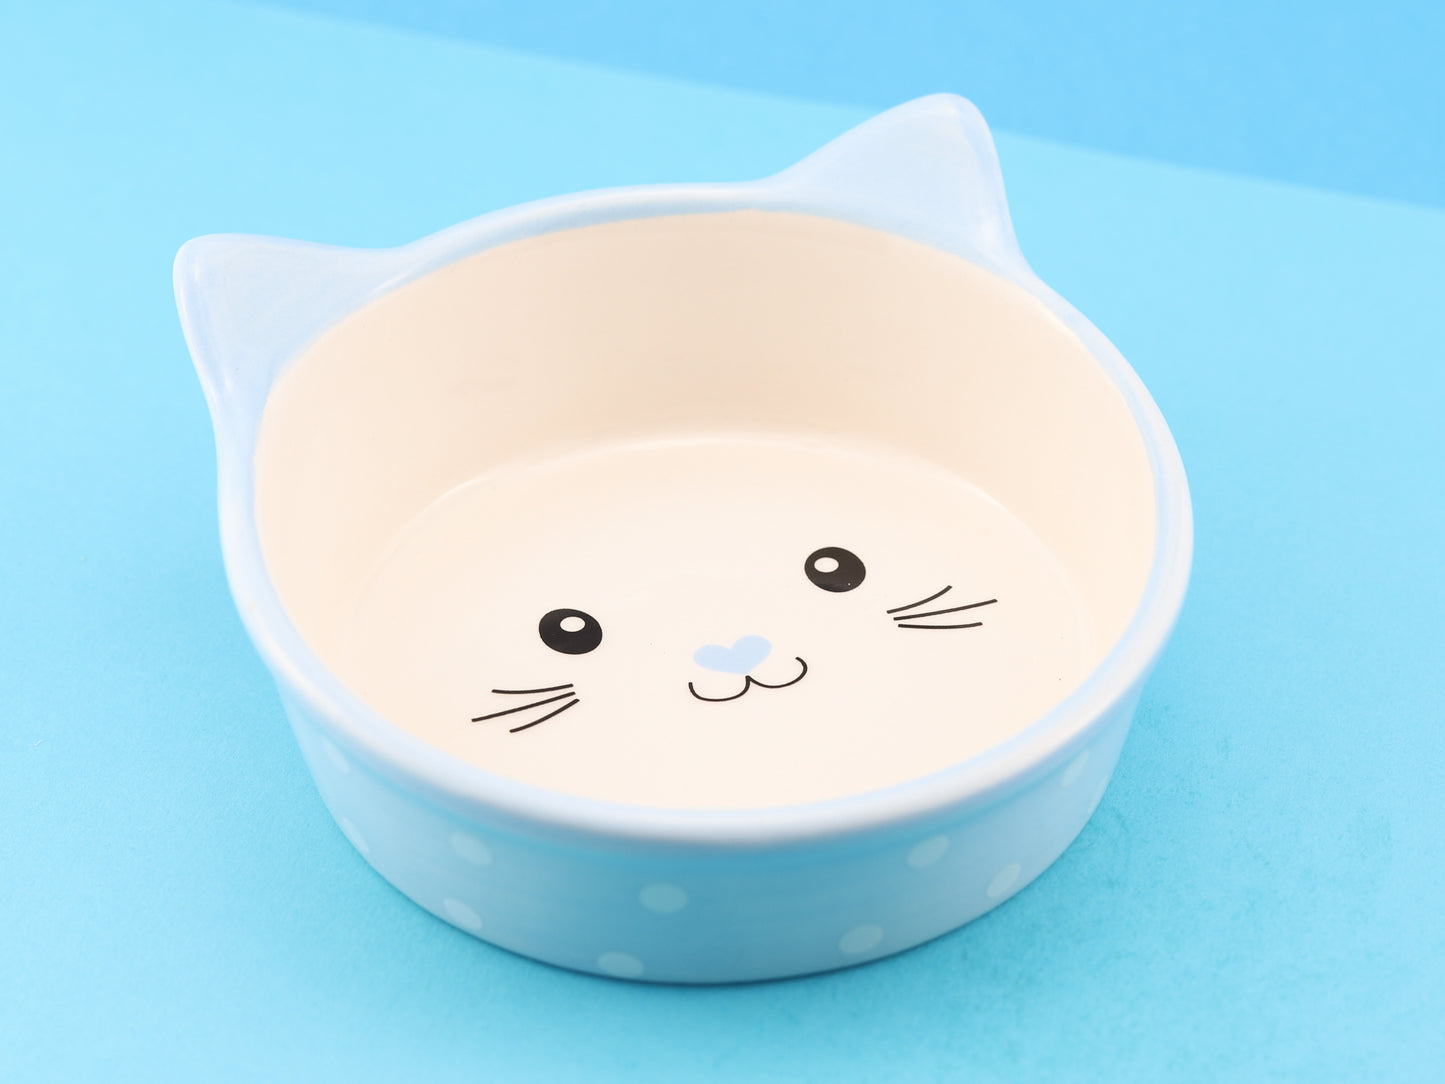 Ceramic cat face bowl, light blue with white polka dots and a cute cat face in the centre of the bowl